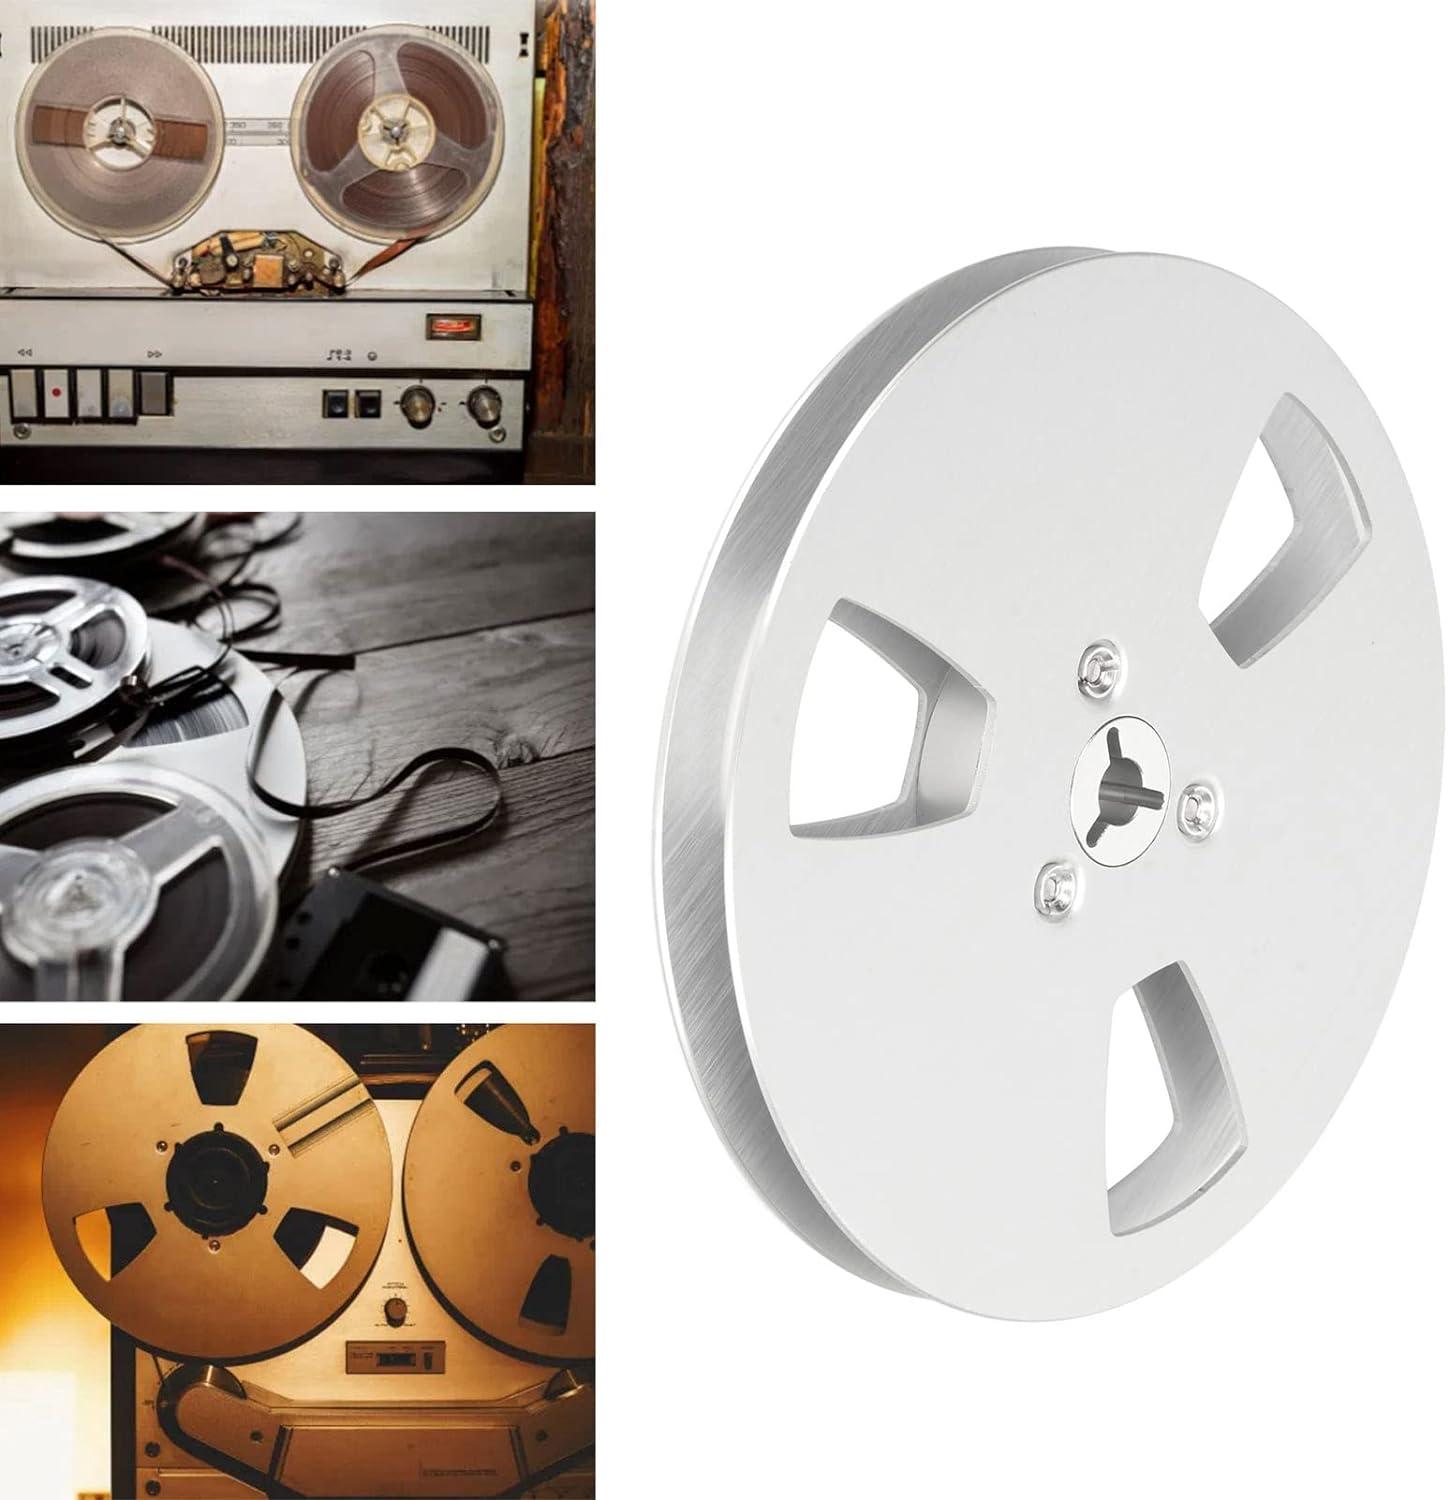 Metal Takeup Reel Opening Machine Parts 3 Hole 1/4 7 Inch Empty Reel for  Reel To Reel Tape Recorder